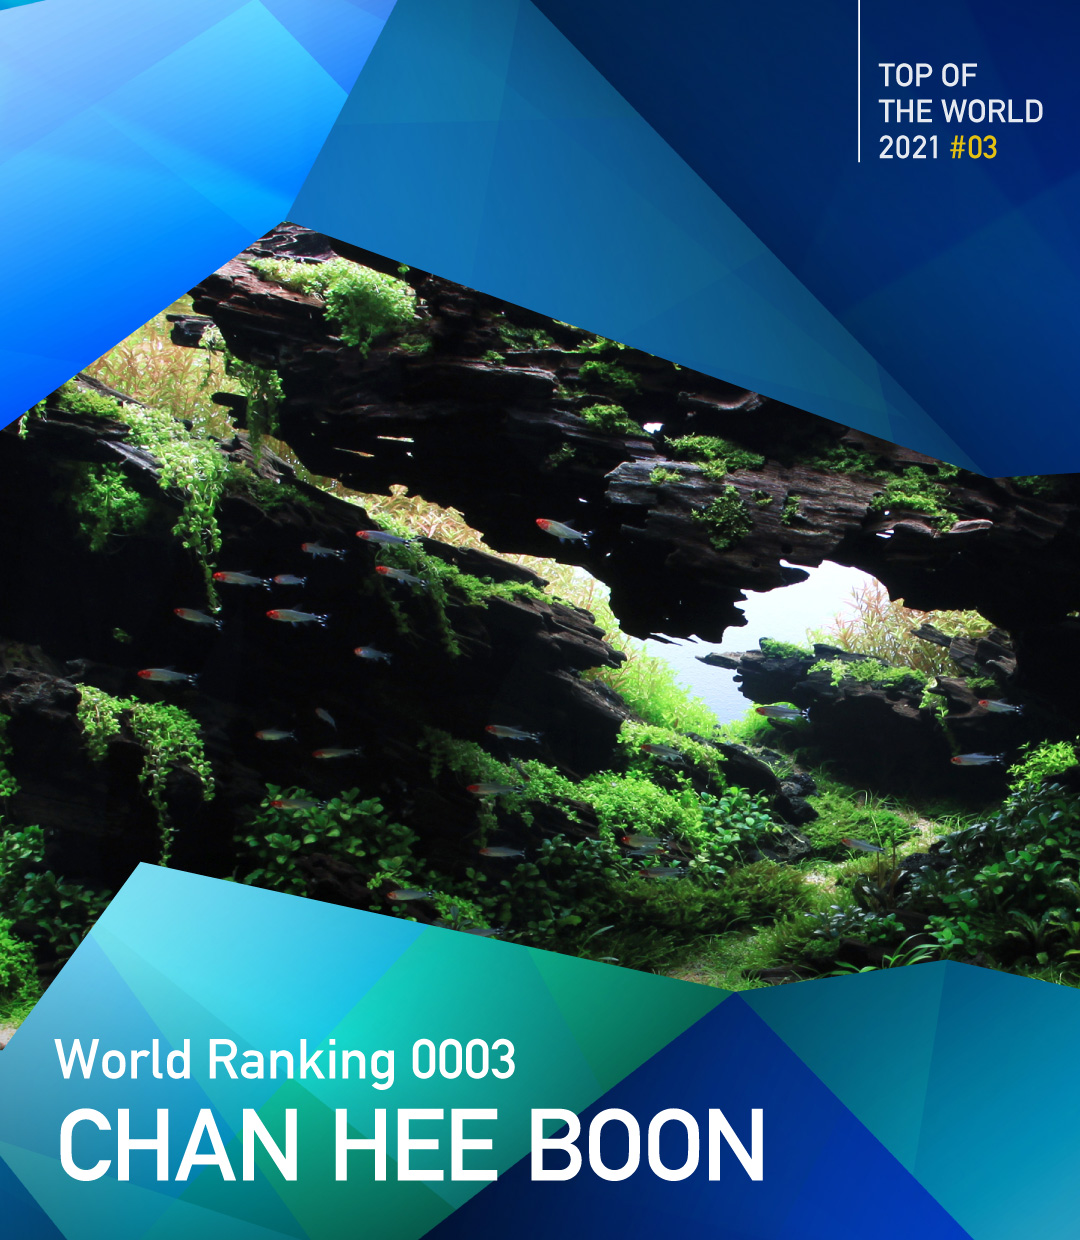 TOP OF THE WORLD 2021 #03 CHAN HEE BOON